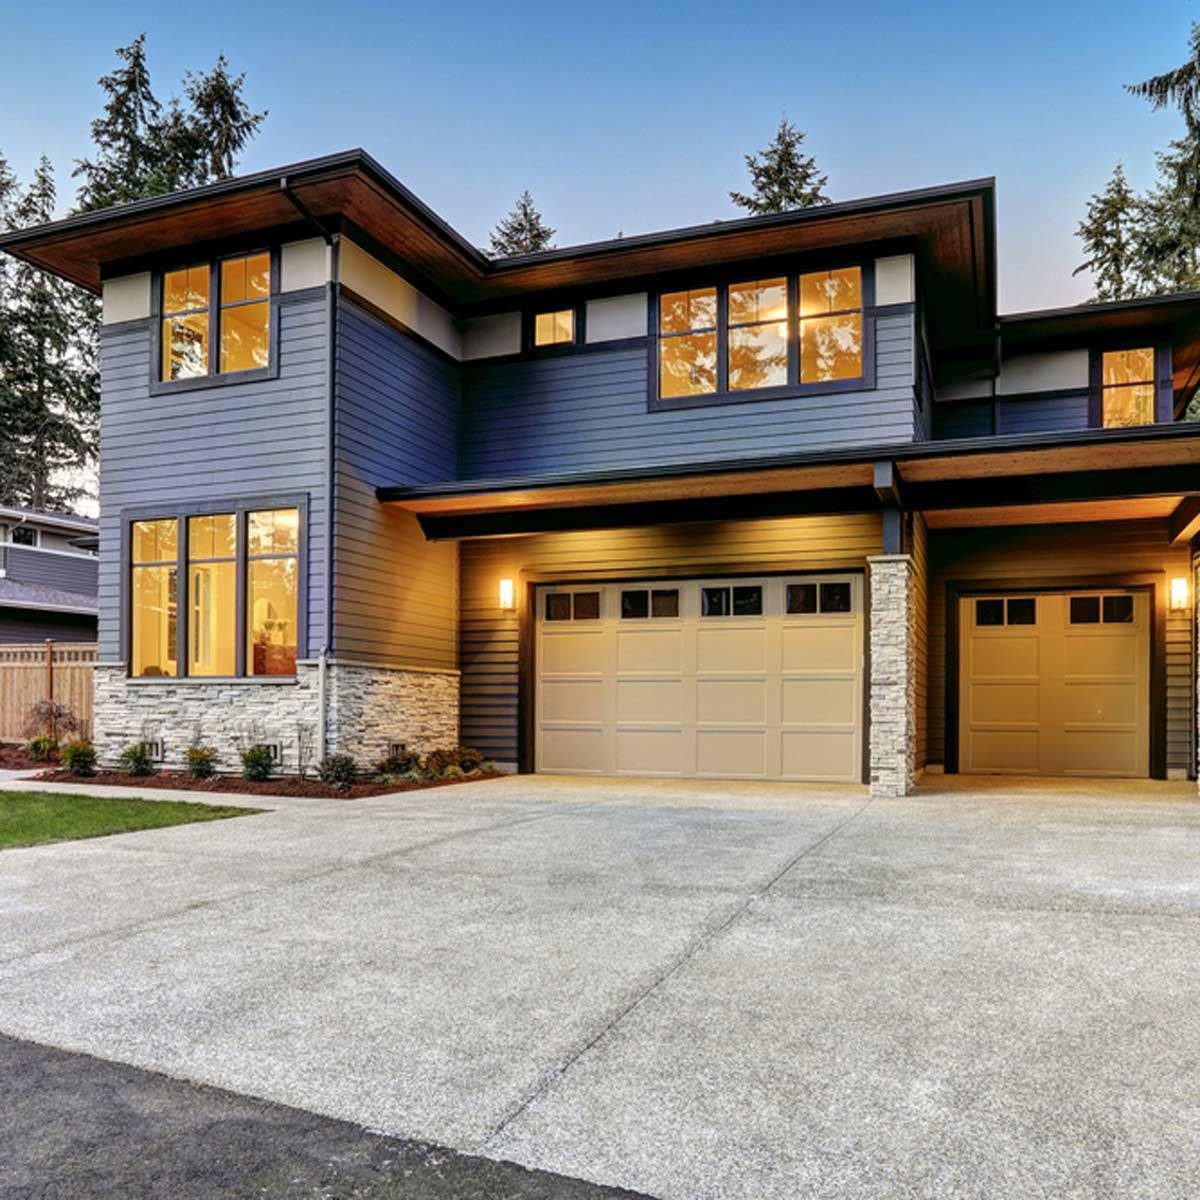 12 Trending Home Exterior Colors — The Family Handyman